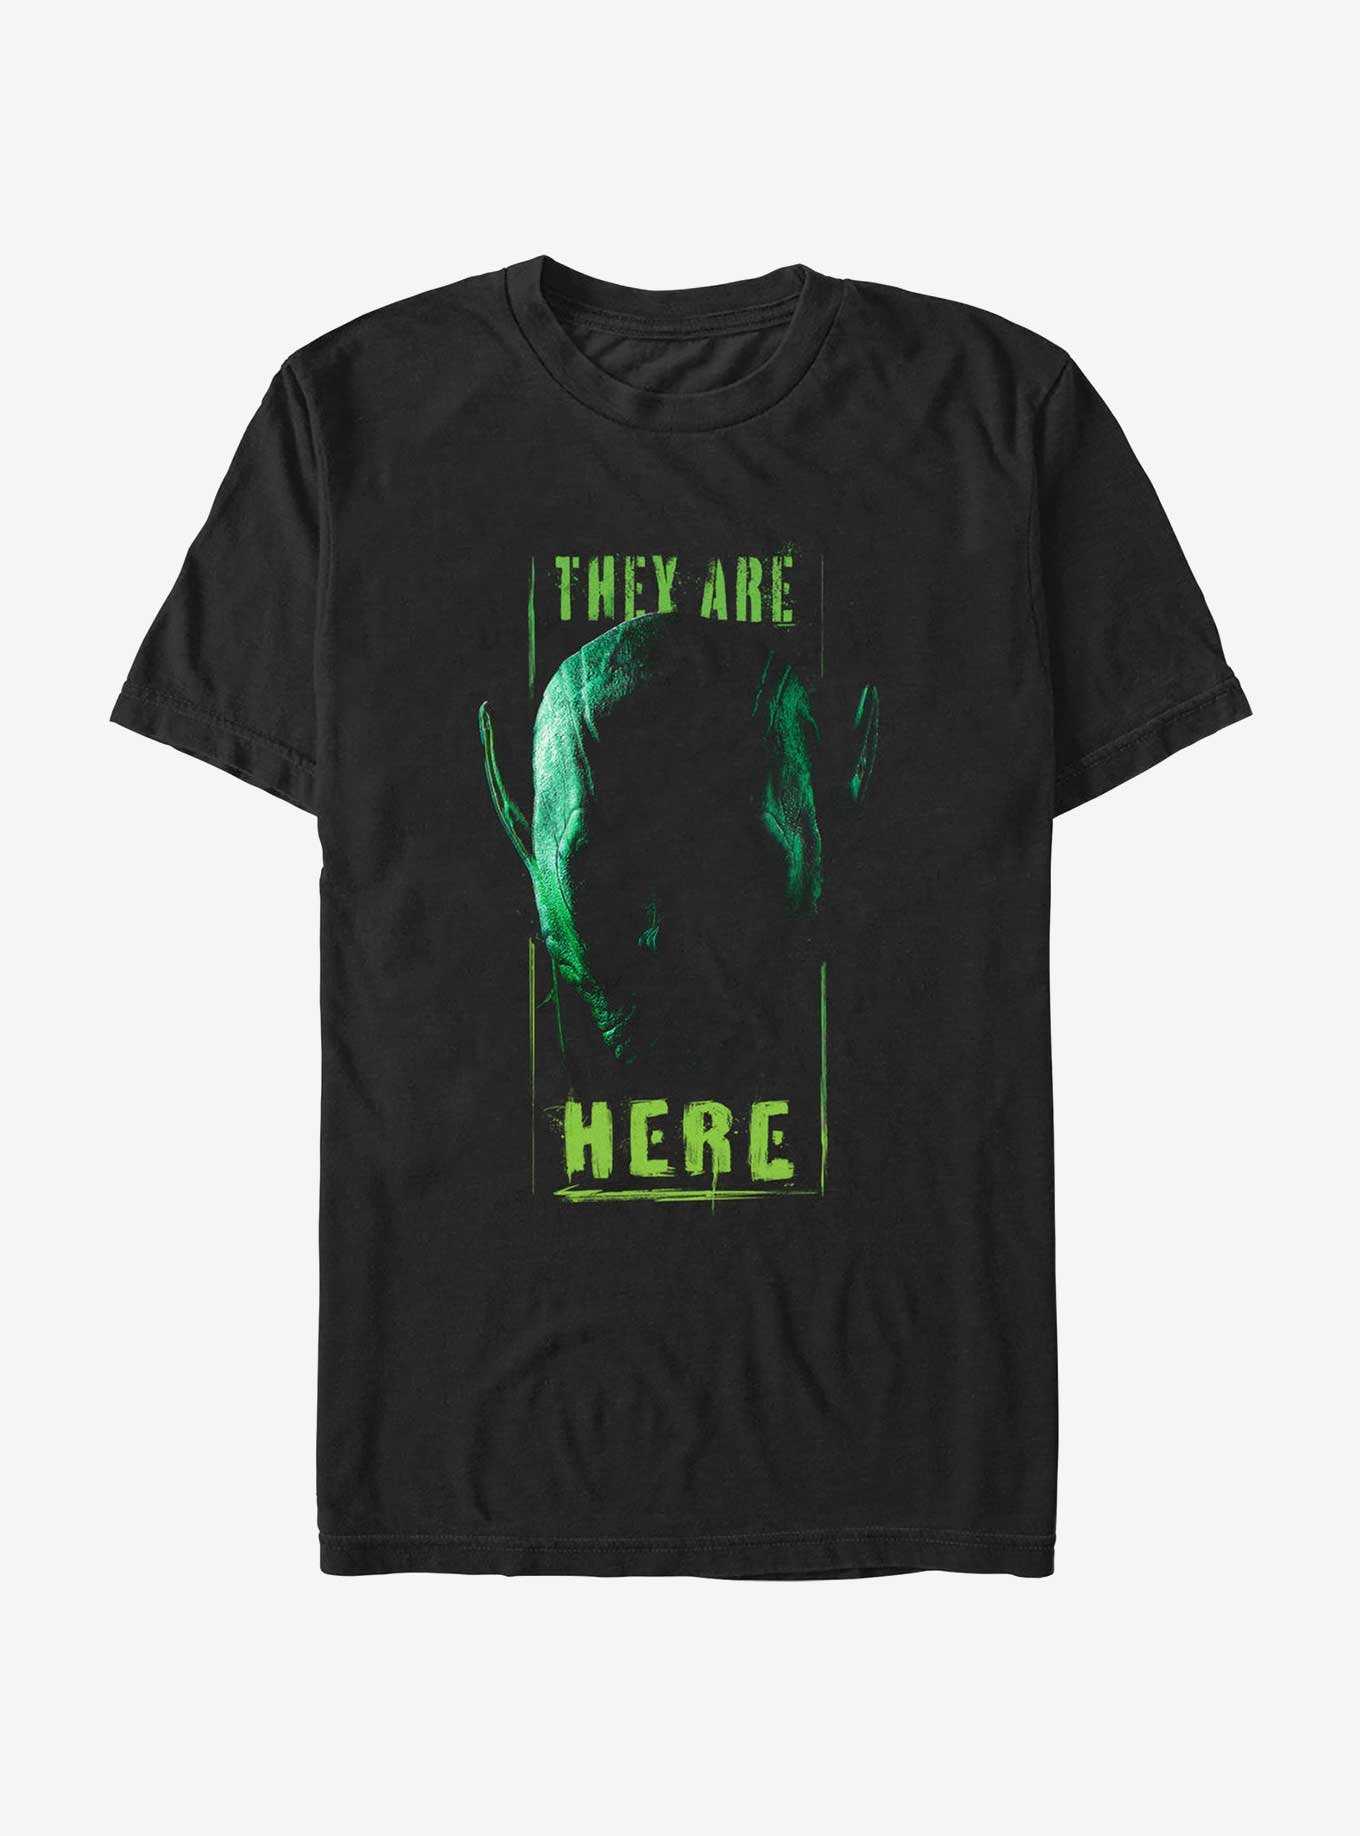 Marvel Secret Invasion They Are Here T-Shirt, , hi-res